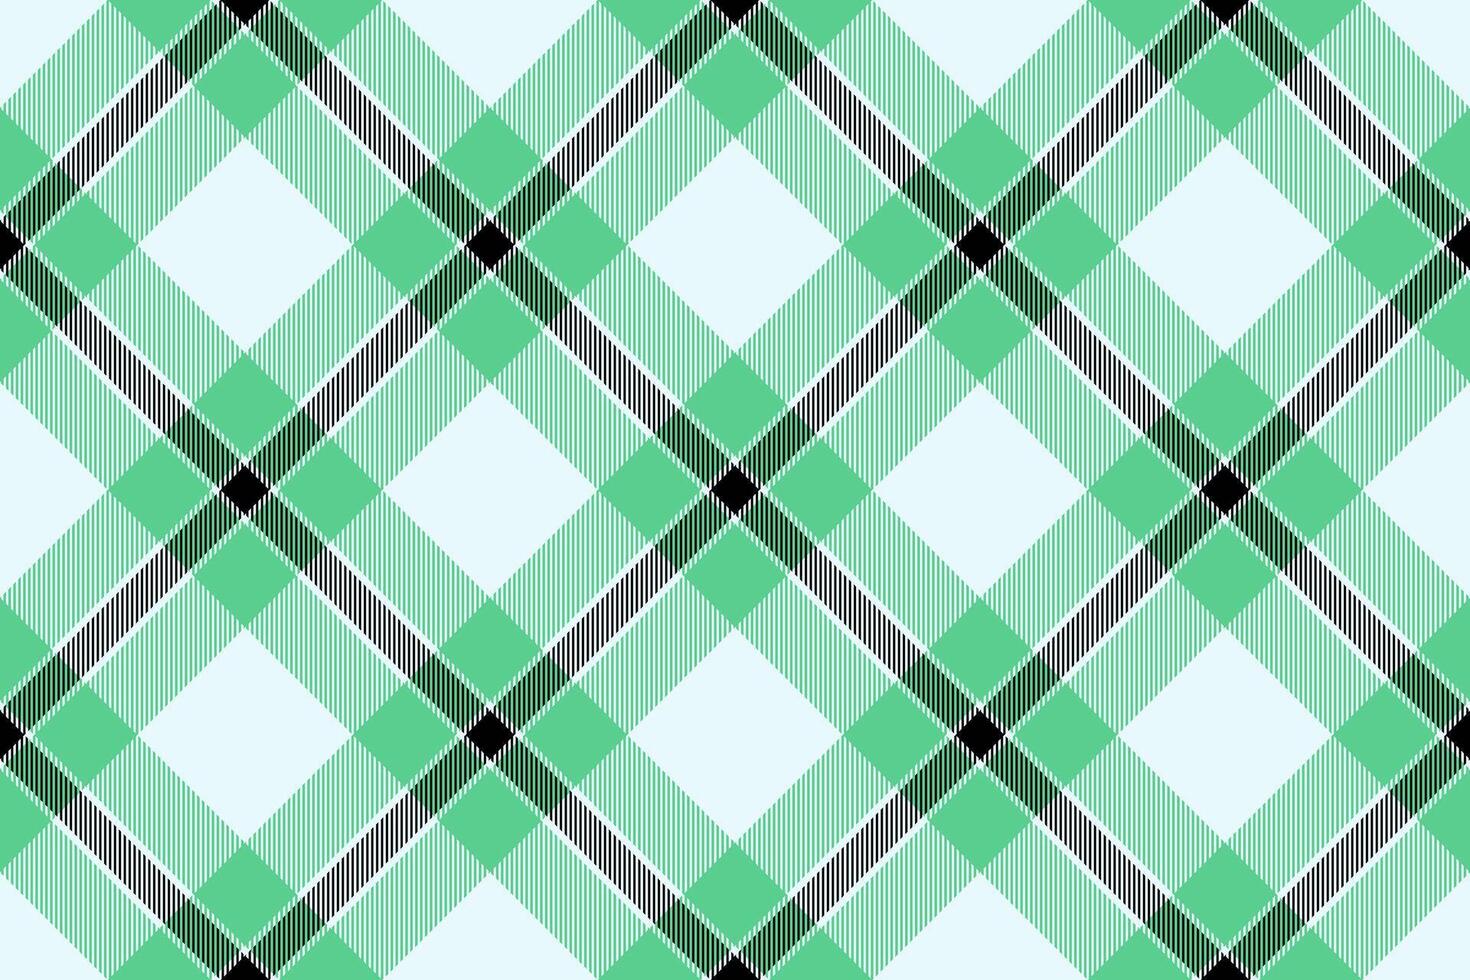 Textile fabric pattern of vector plaid seamless with a background tartan check texture.